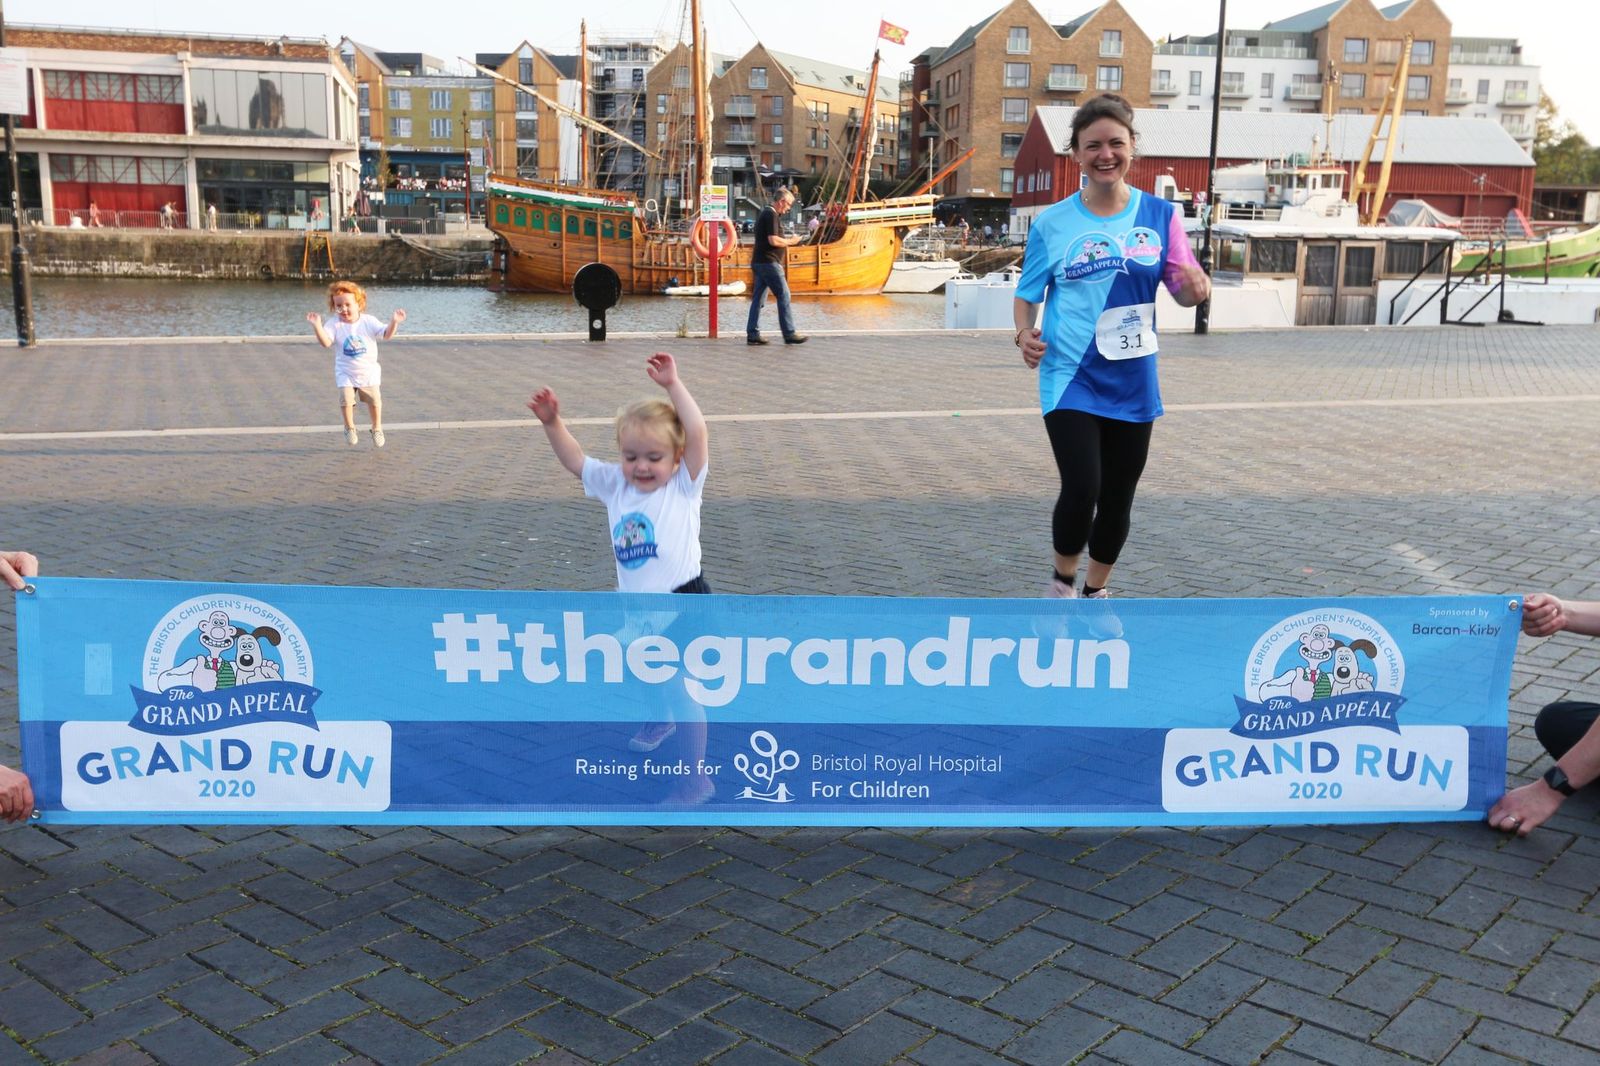 The Grand Appeal launches virtual running event across the city